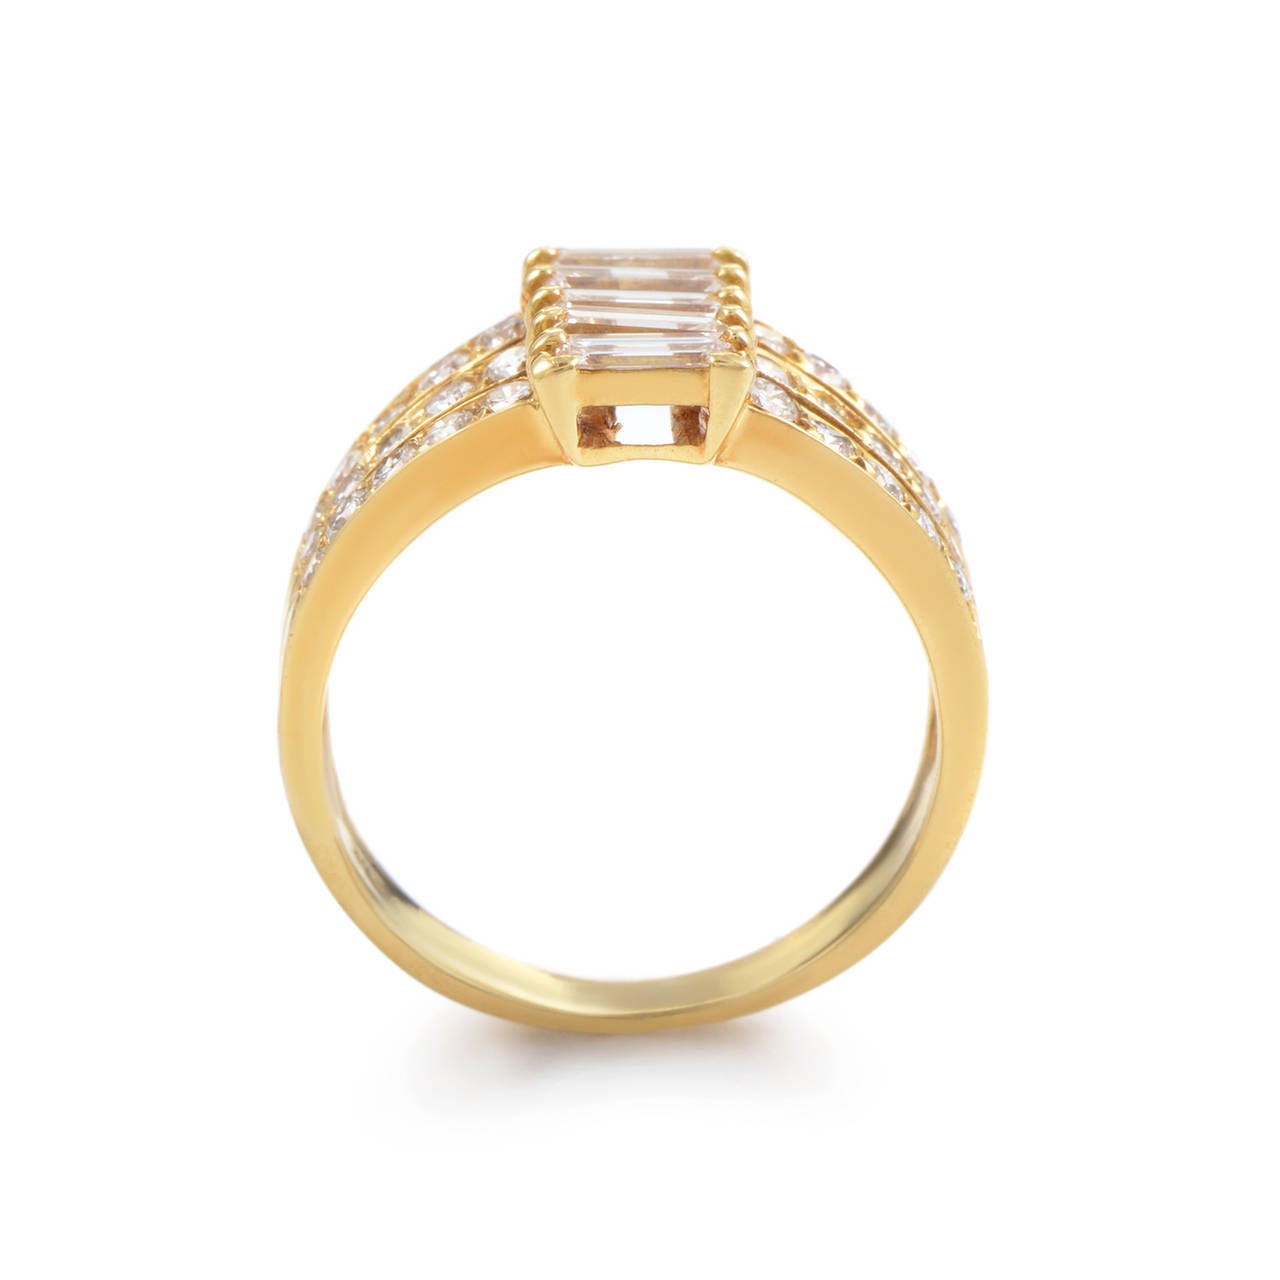 The shimmering, decadently crafted design of this ring from Van Cleef & Arpels is sure to take your breath away! The ring is comprised of three 18K yellow gold bands forged together to make one. Lastly, the bands are set with round brilliant